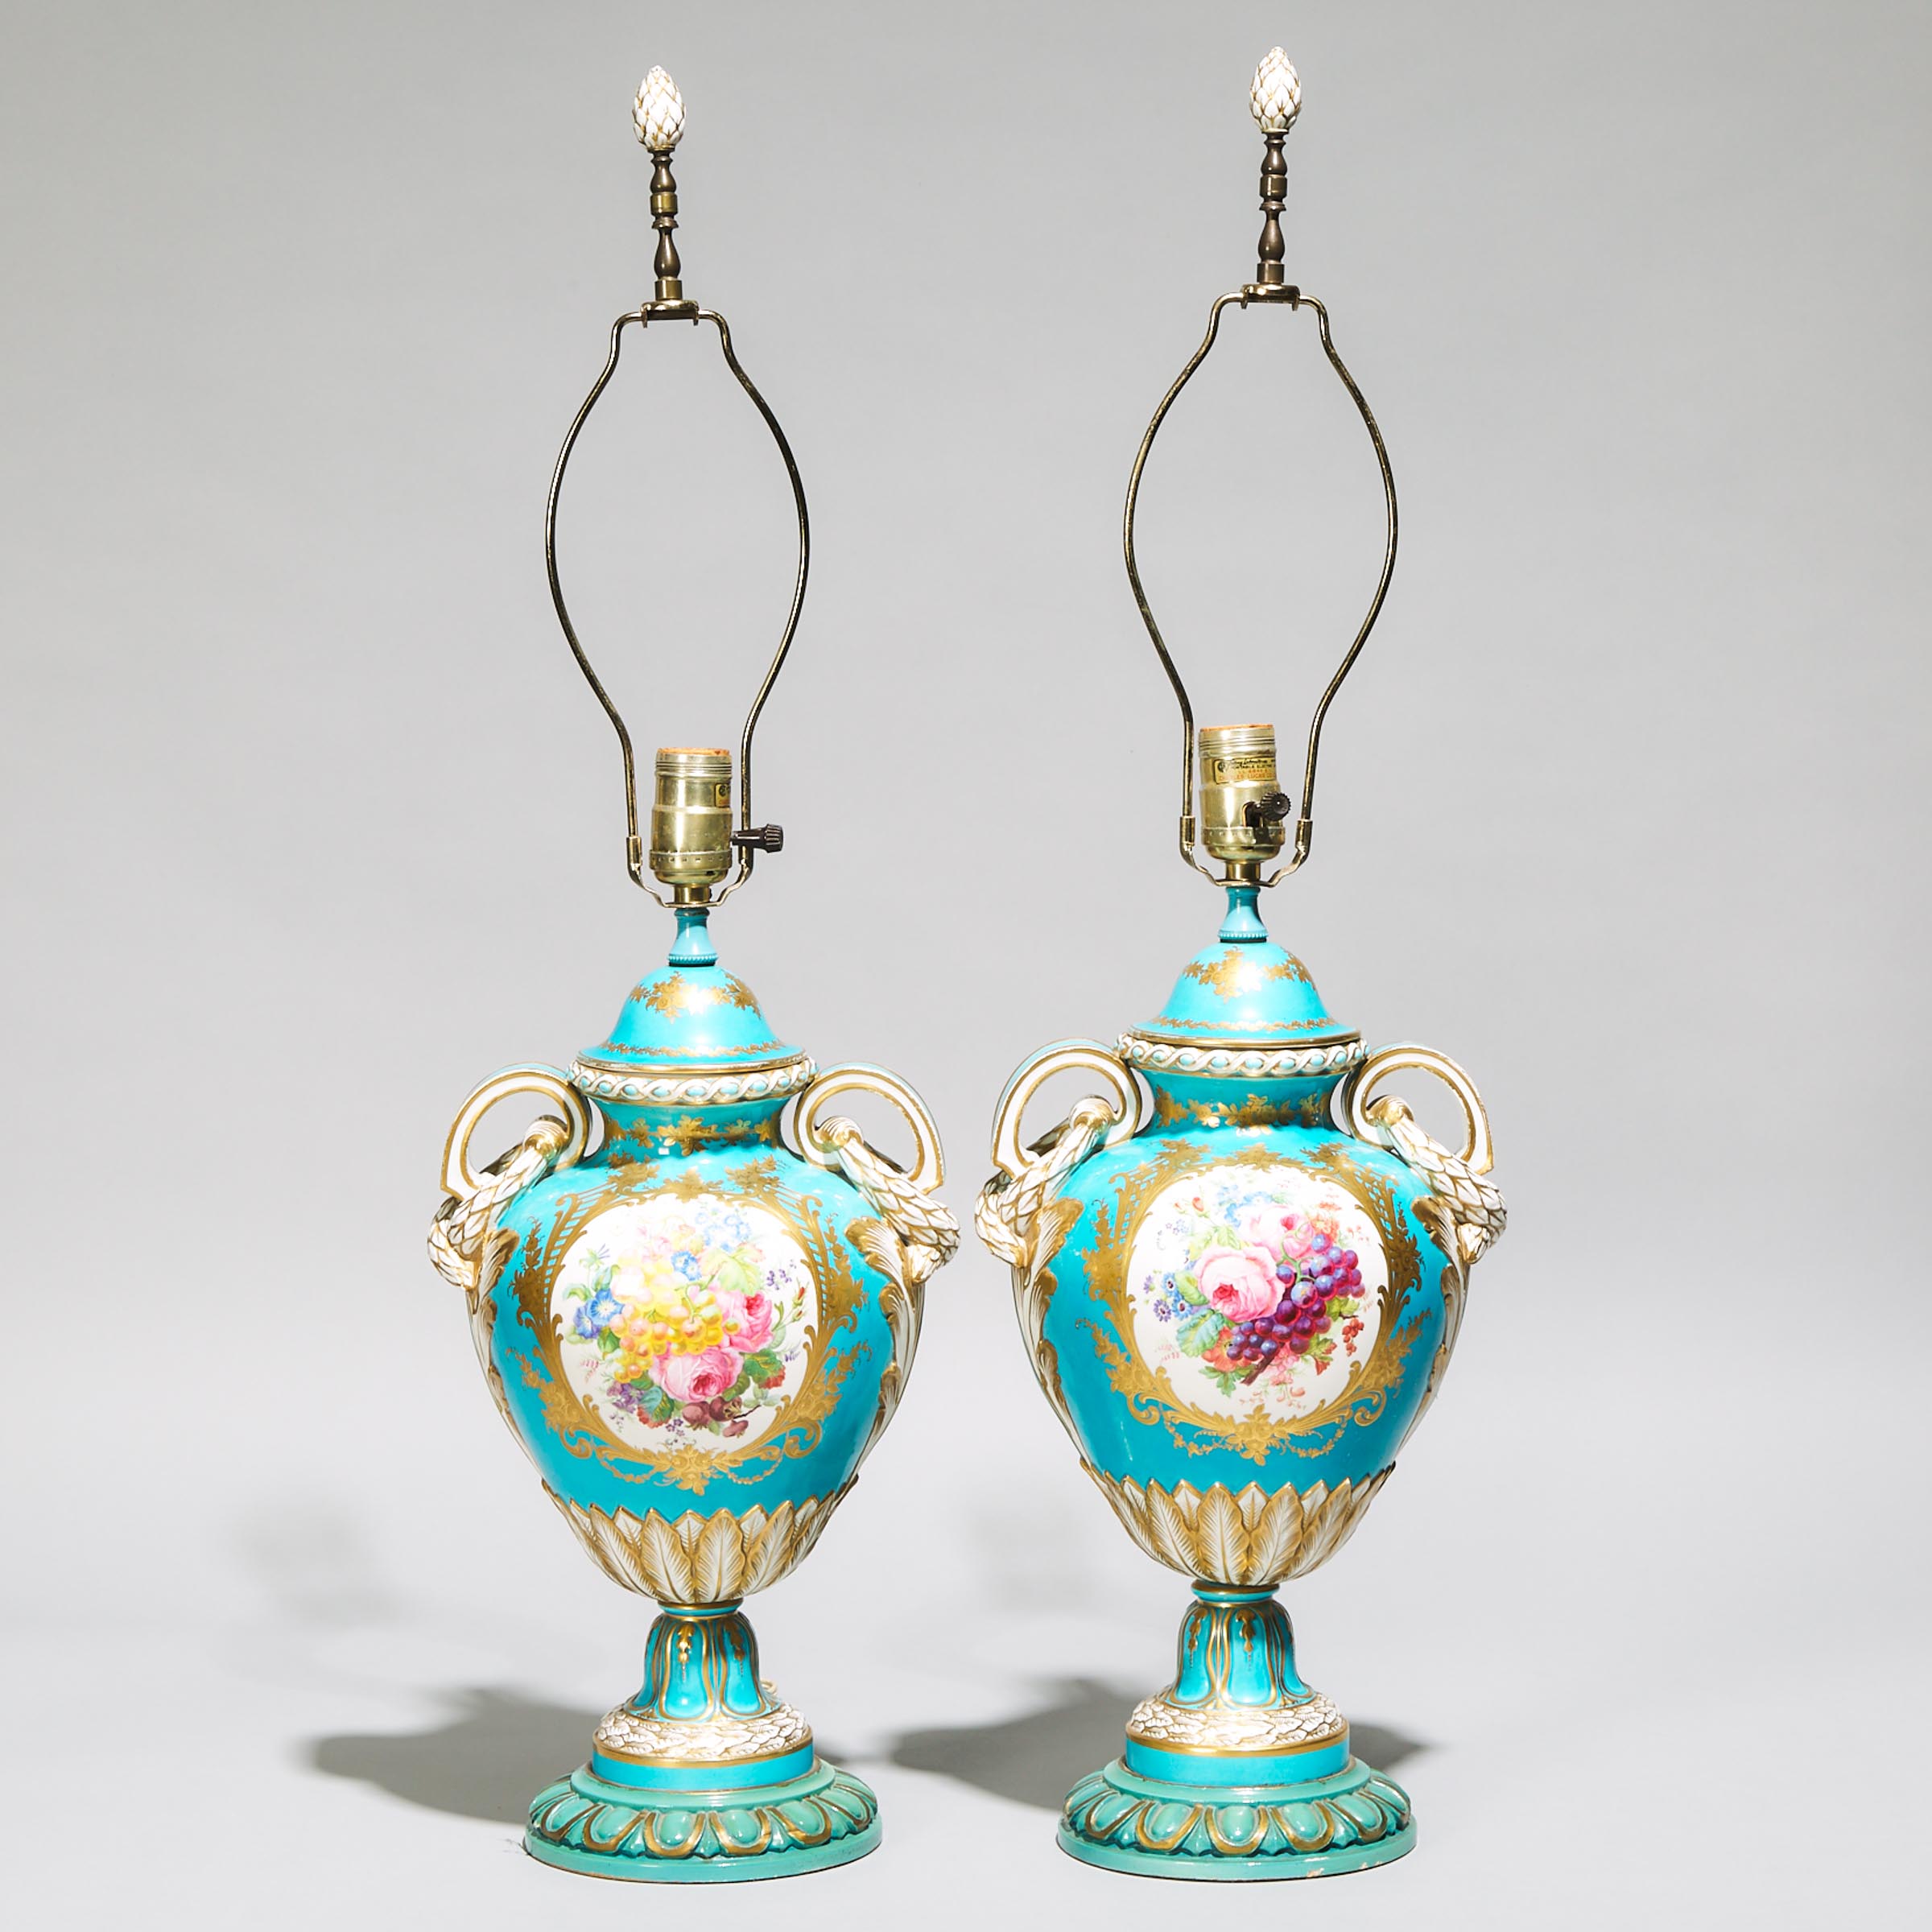 Pair of 'Sèvres' Covered Vases, late 19th century